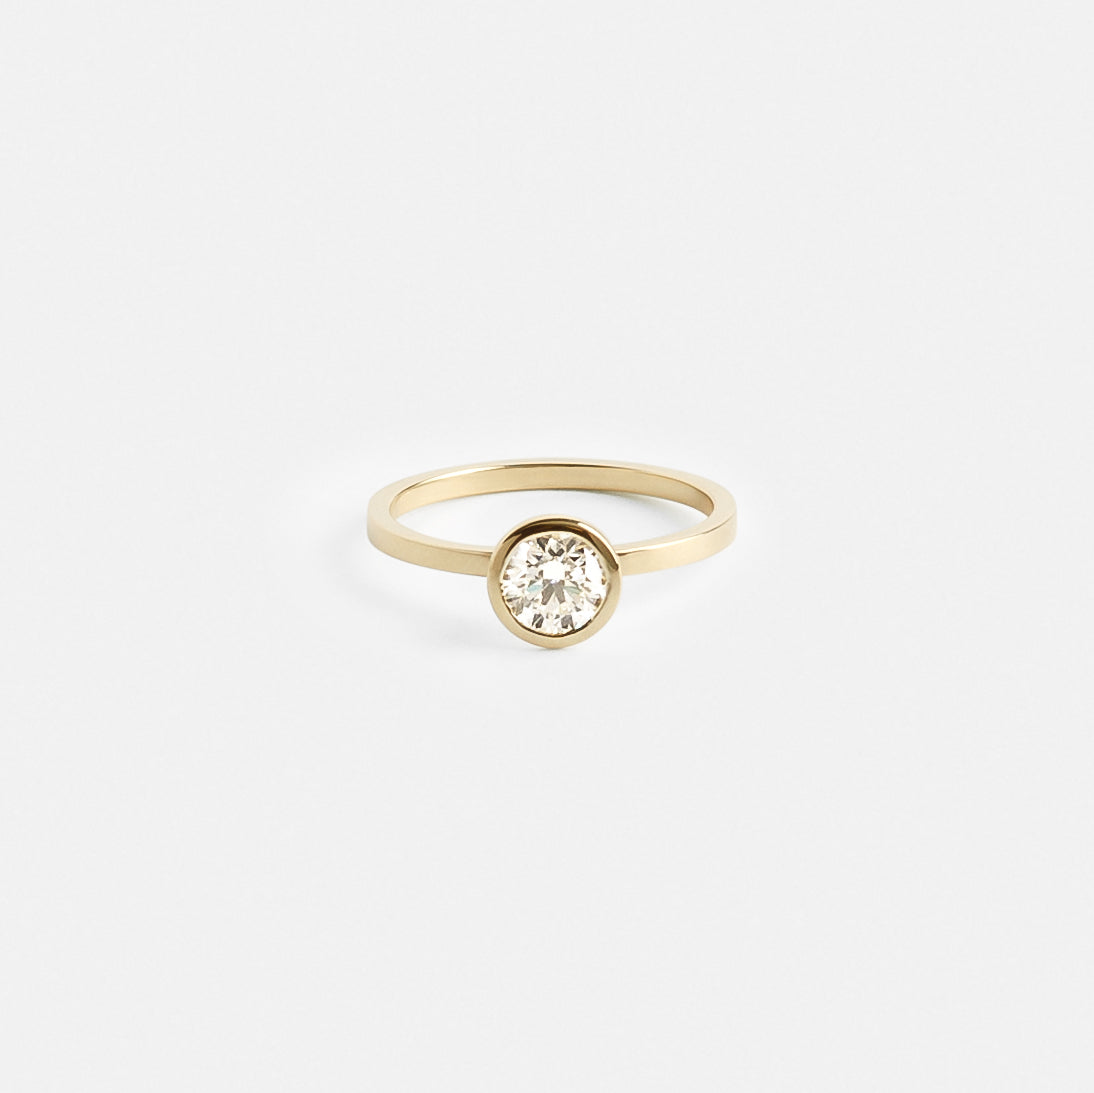 Mana Unique Engagement Ring in 14k Gold set with a 1.01ct round brilliant cut lab-grown diamond By SHW Fine Jewelry New York City